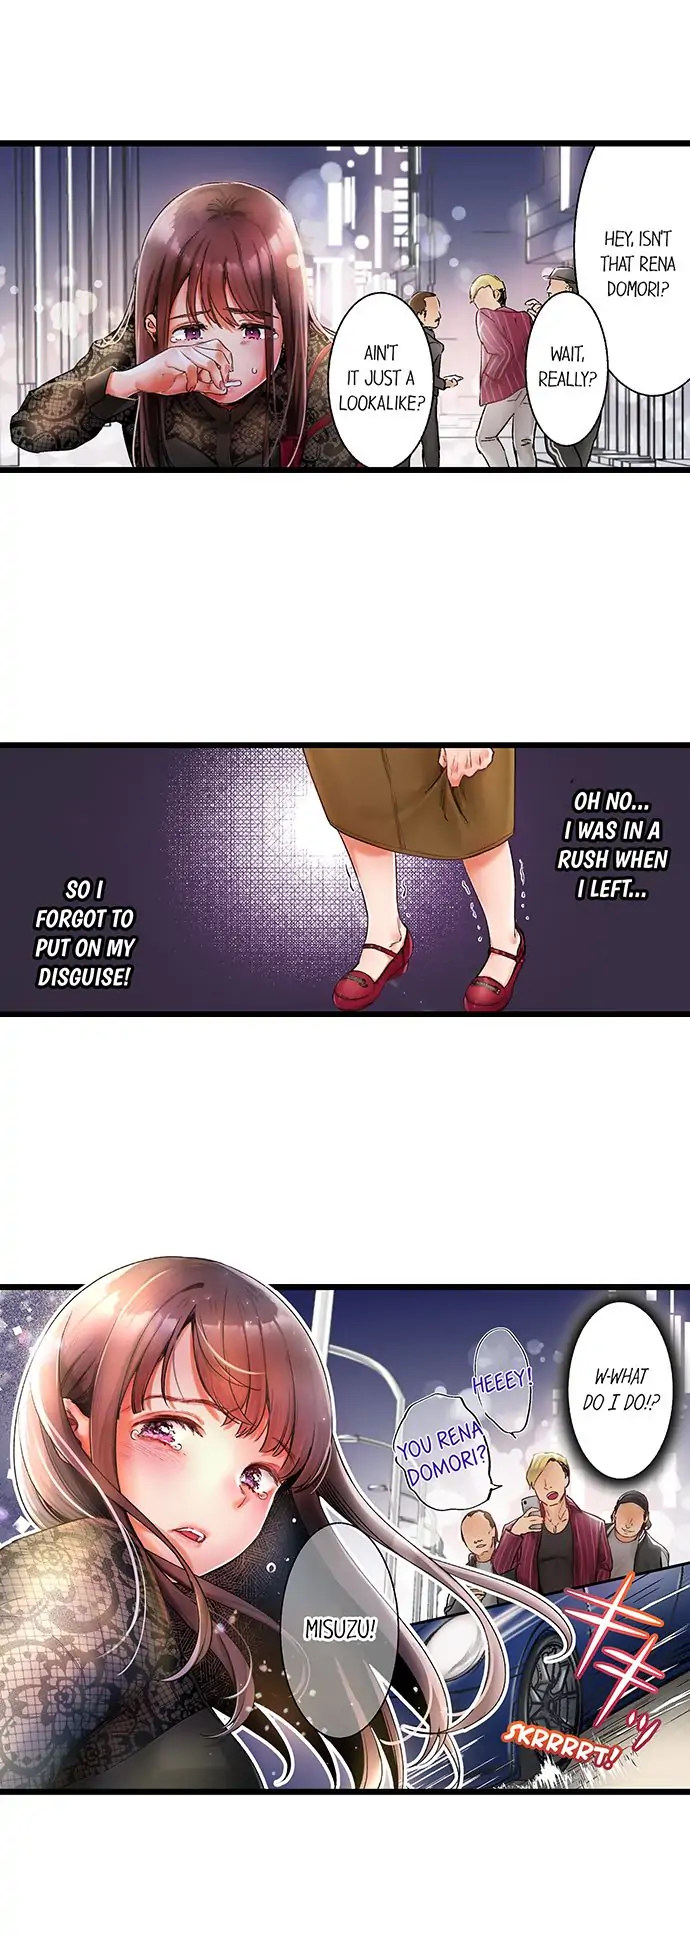 Show Me What Comes After Kissing - Chapter 2 Page 2